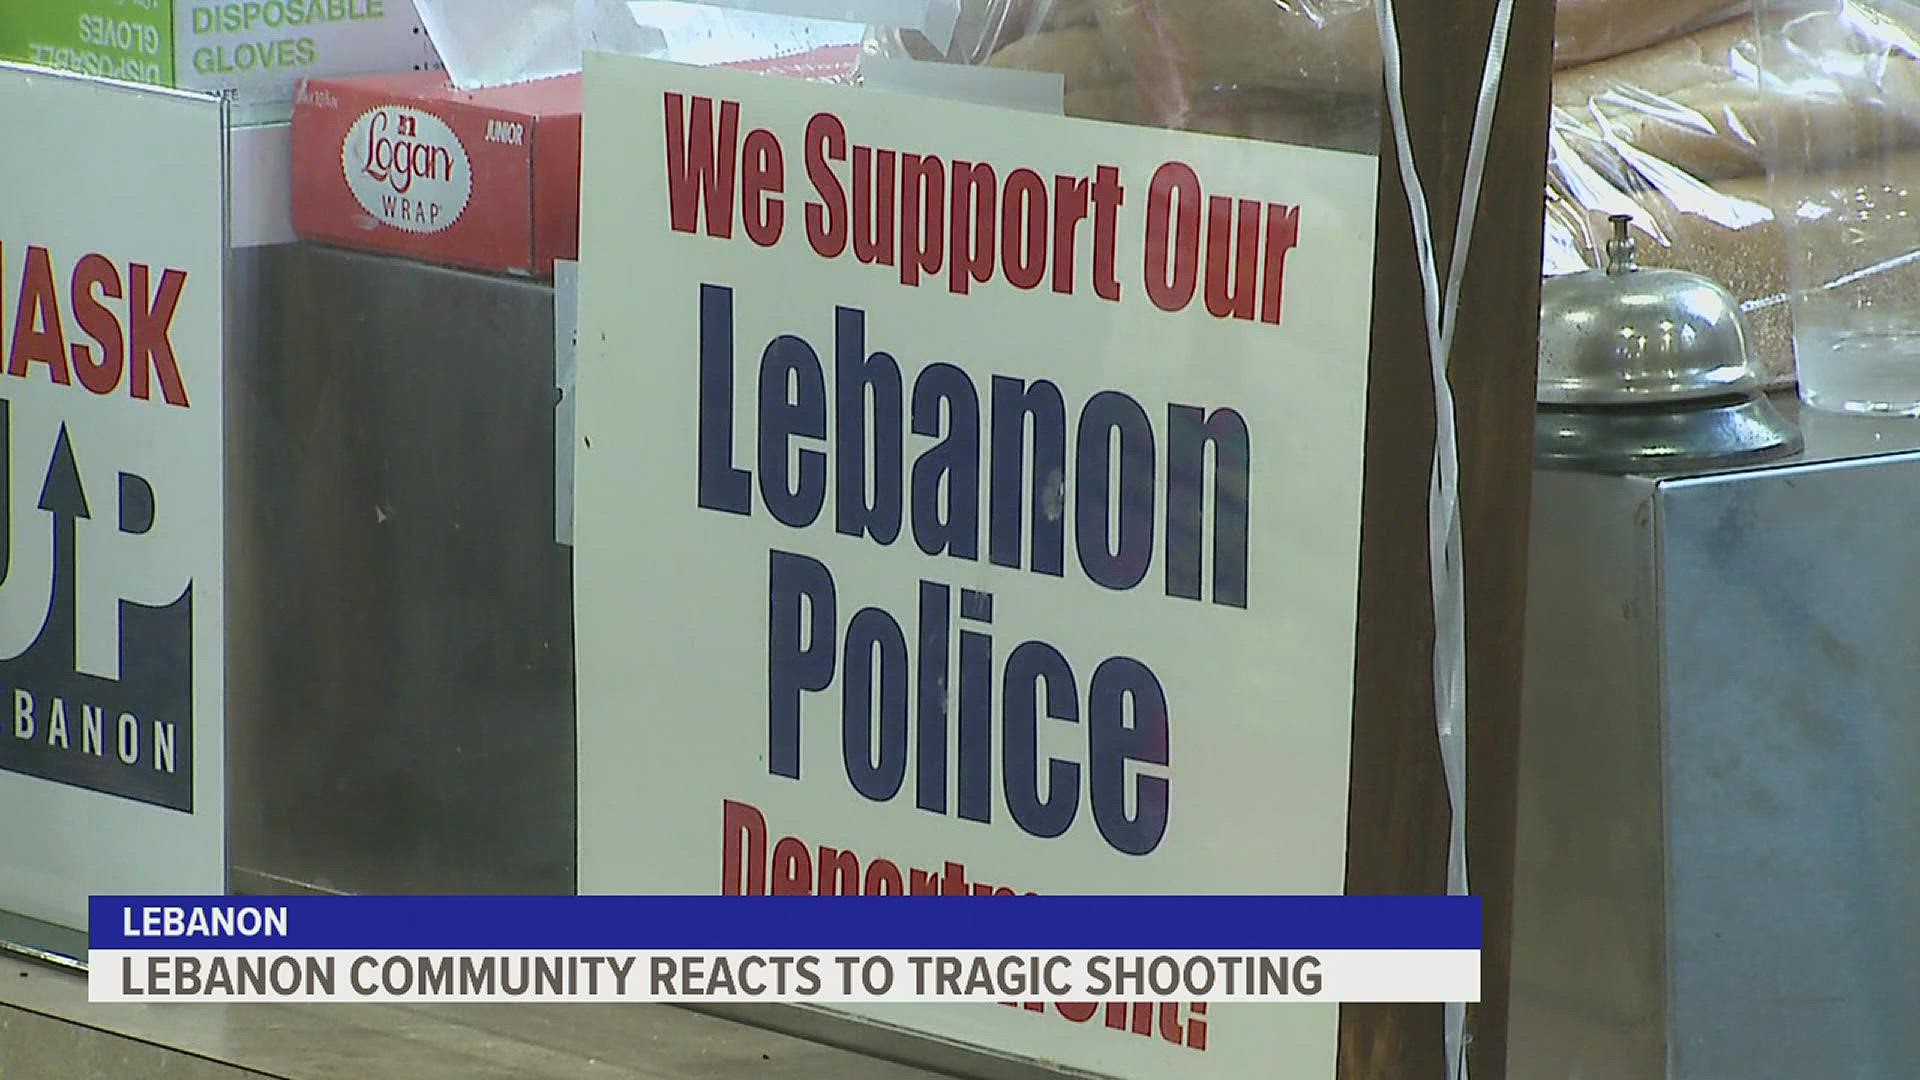 The incident took the life of one Lebanon City police officer, and injured two others.